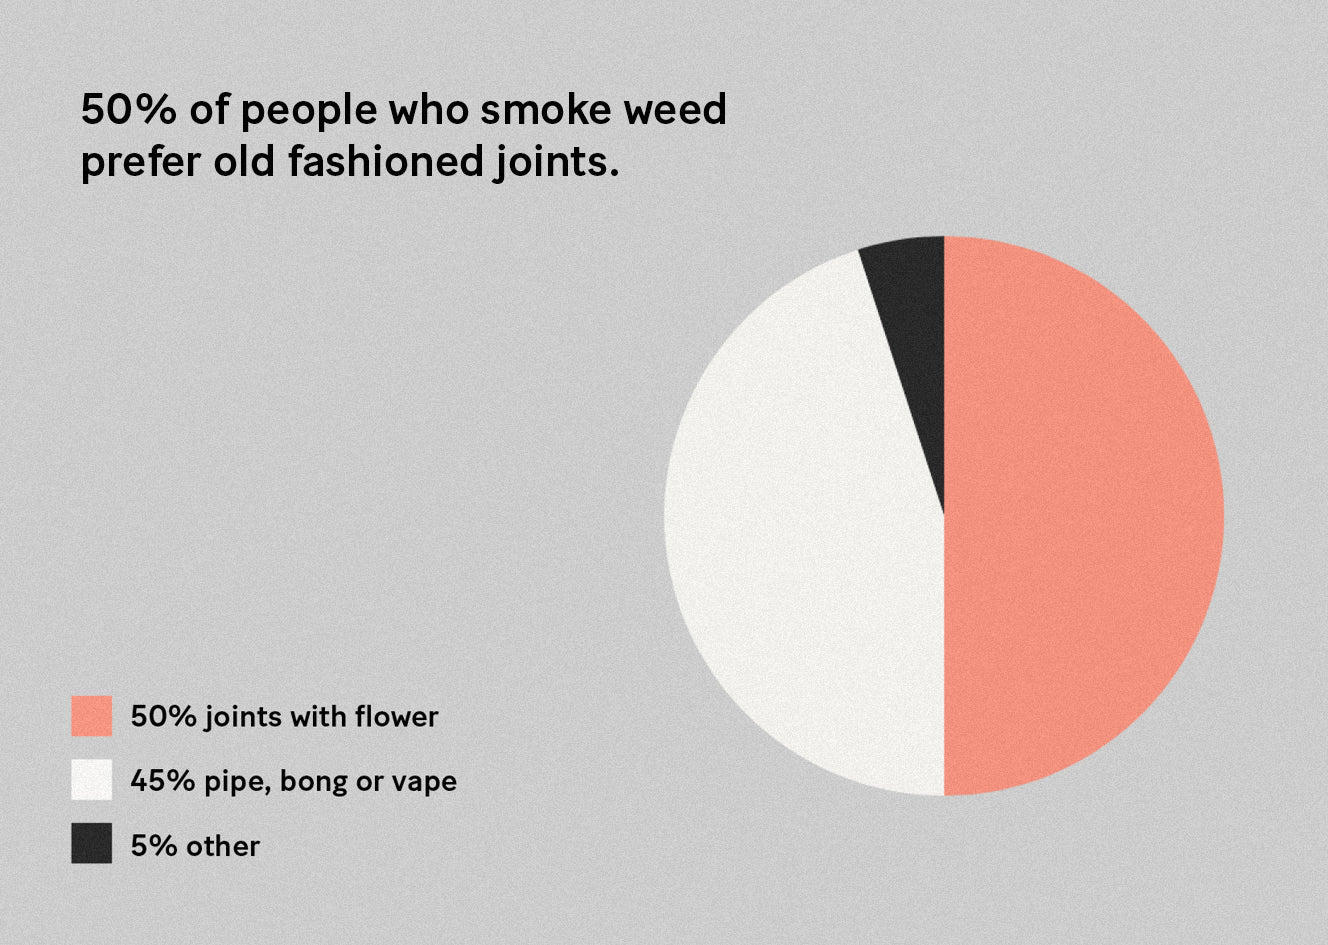 Infographic pie chart showing that 50% of people who smoke weed prefer to consume via joints.